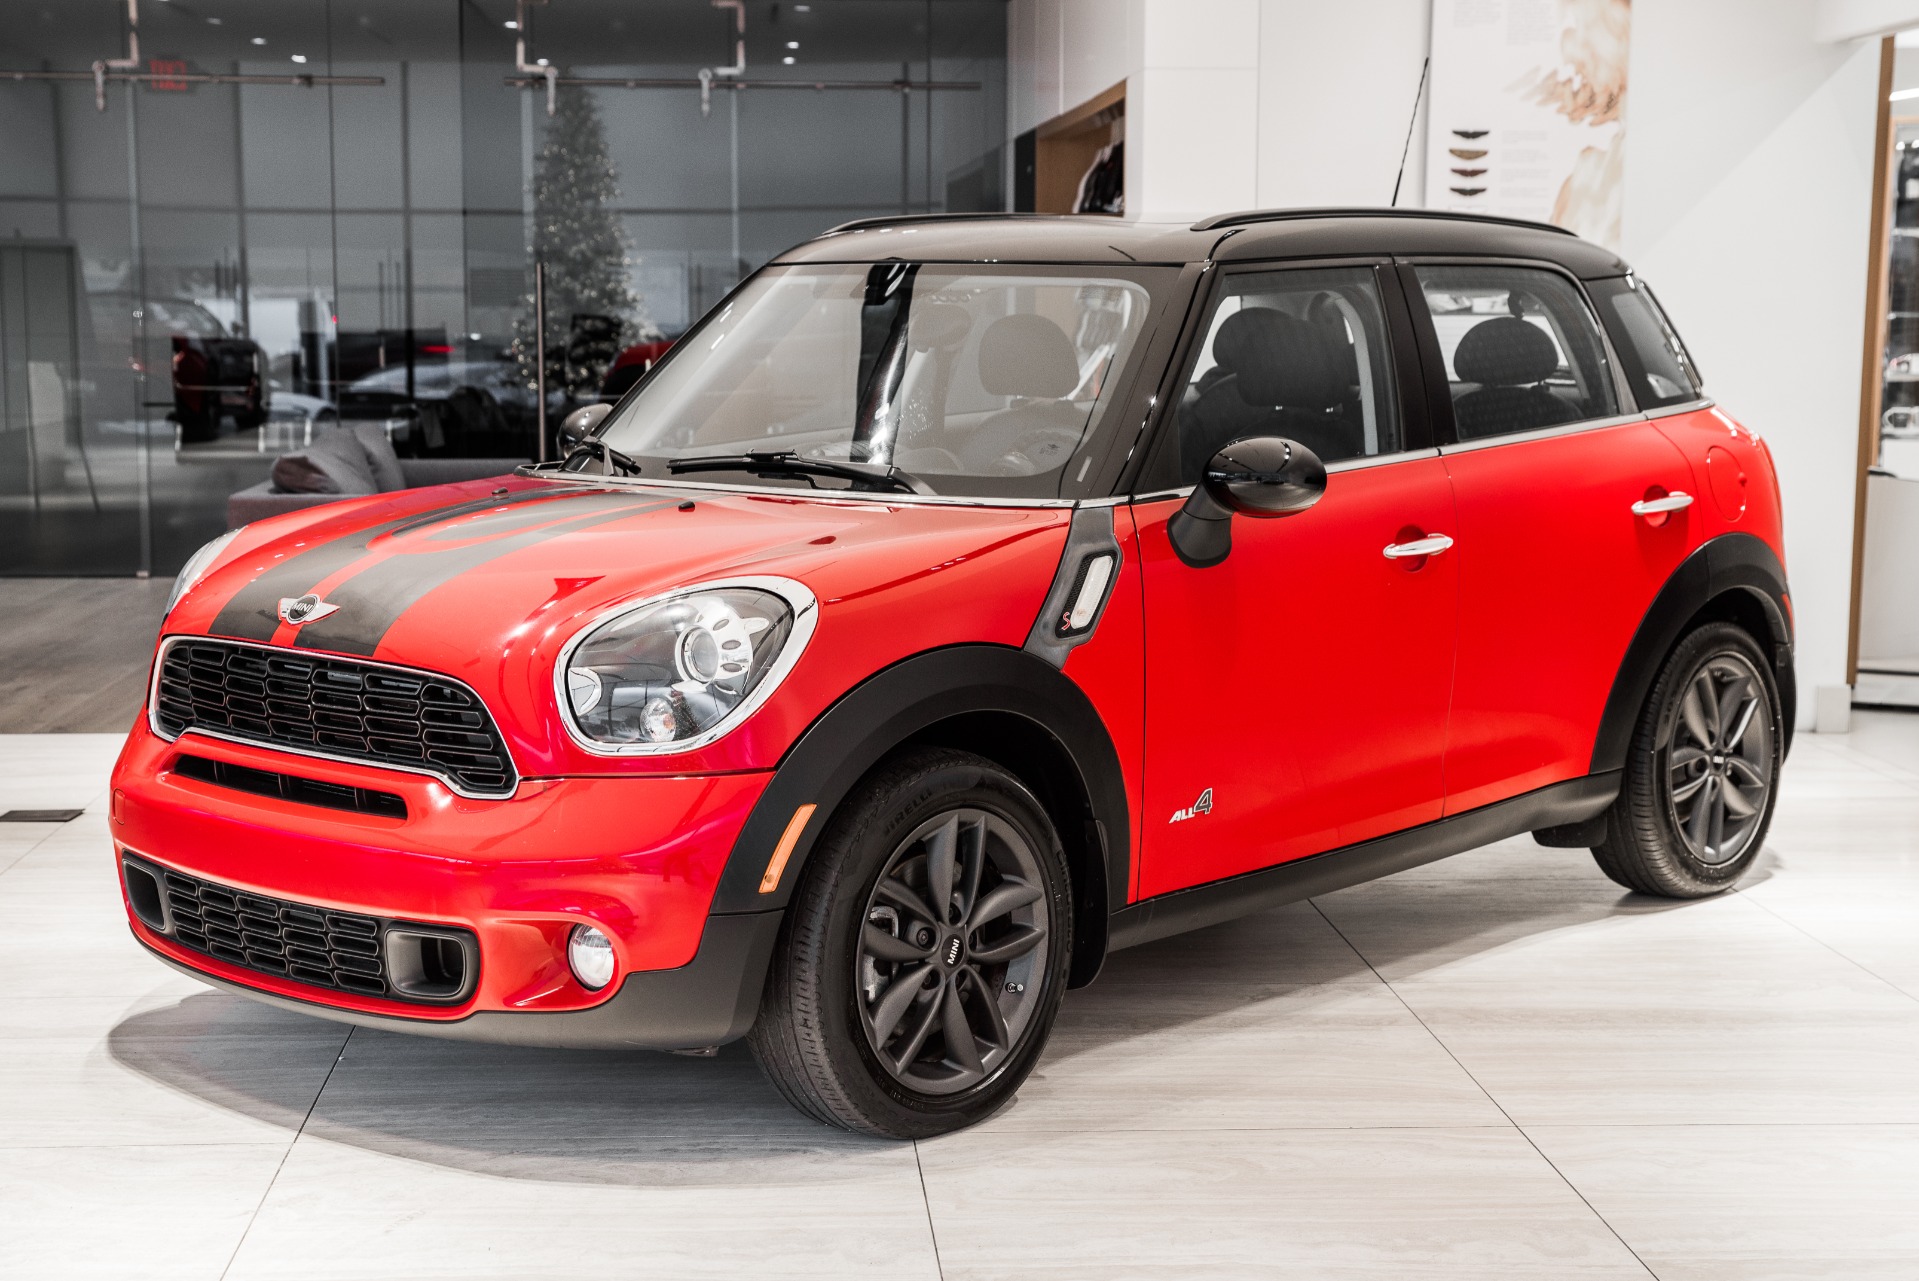 Used 2012 MINI Cooper Countryman S ALL4 For Sale (Sold) | Bentley  Washington DC Stock #PL63650